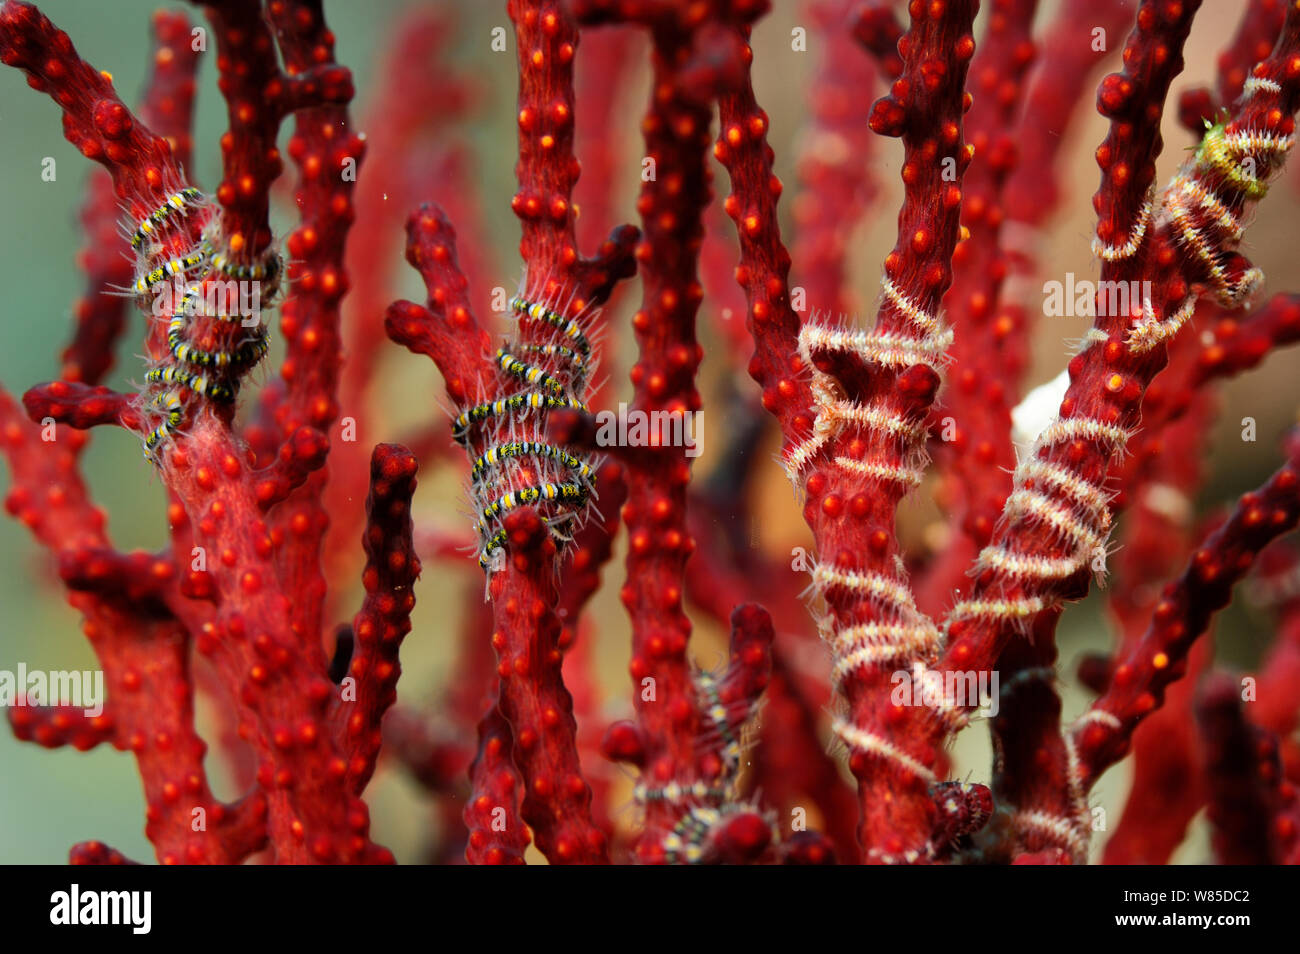 Tiny Brittlestars (Ophiothrix sp) wrapped around the branches of Fan coral, Raja Ampat, West Papua, Indonesia, Pacific Ocean. Stock Photo